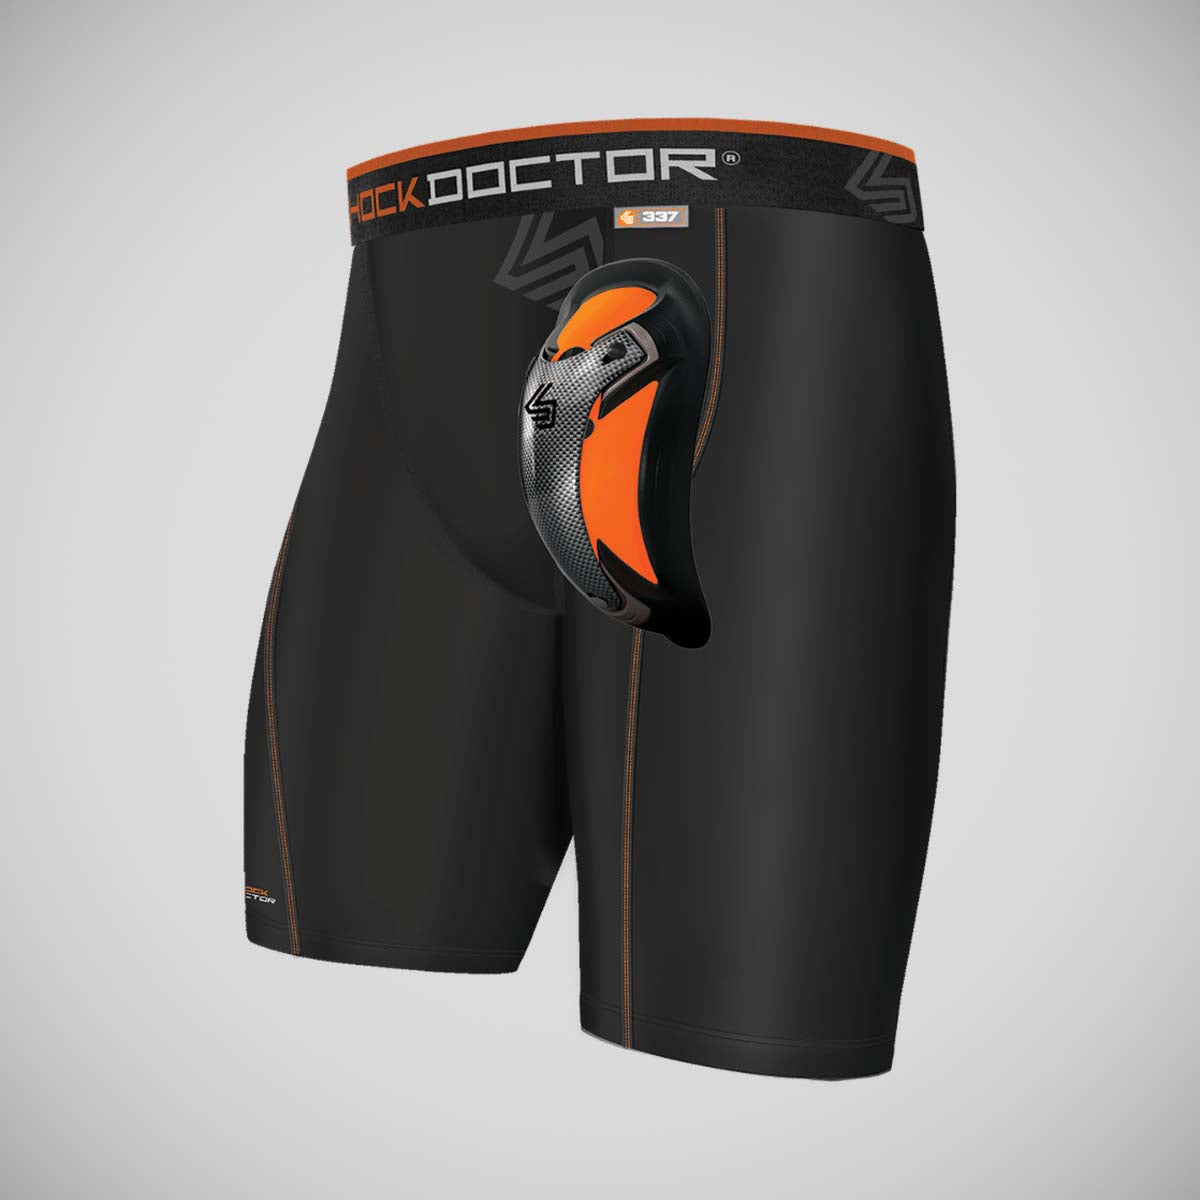 Shock Doctor Core Compression Short With Bioflex Cup